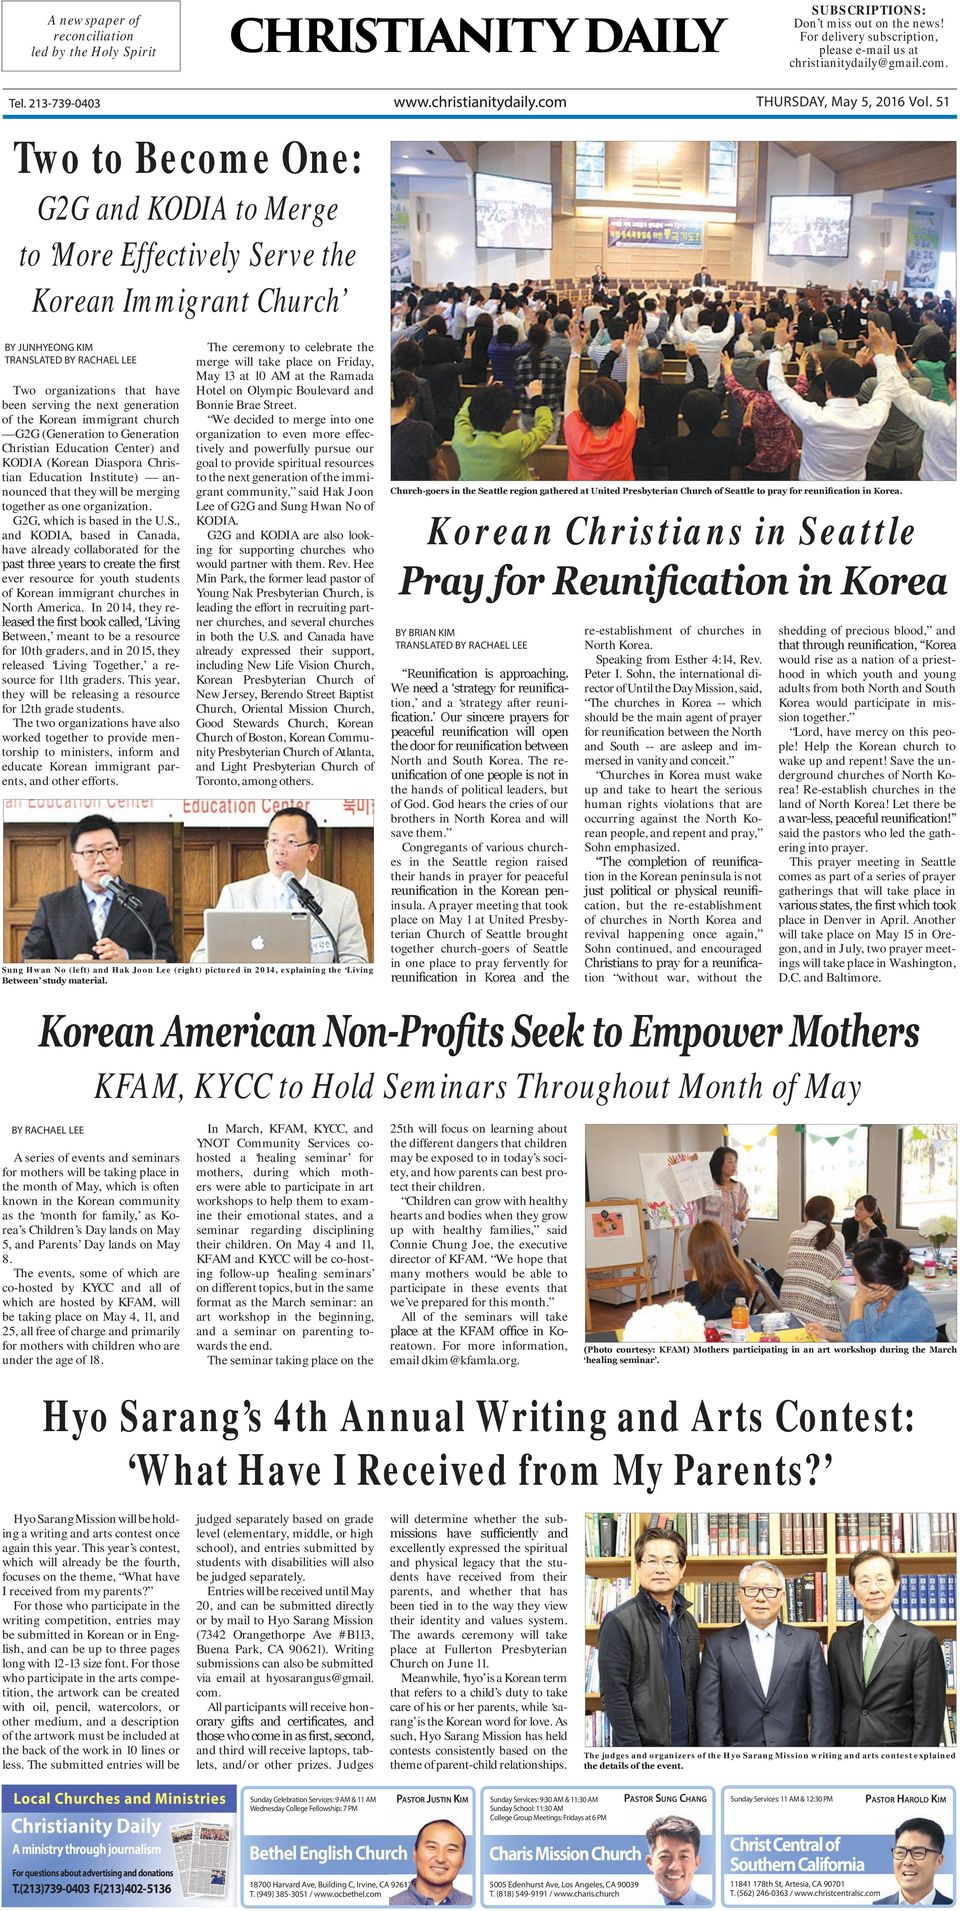 generation of the Korean immigrant church G2G (Generation to Generation Christian Education Center) and KODIA (Korean Diaspora Christian Education Institute) announced that they will be merging